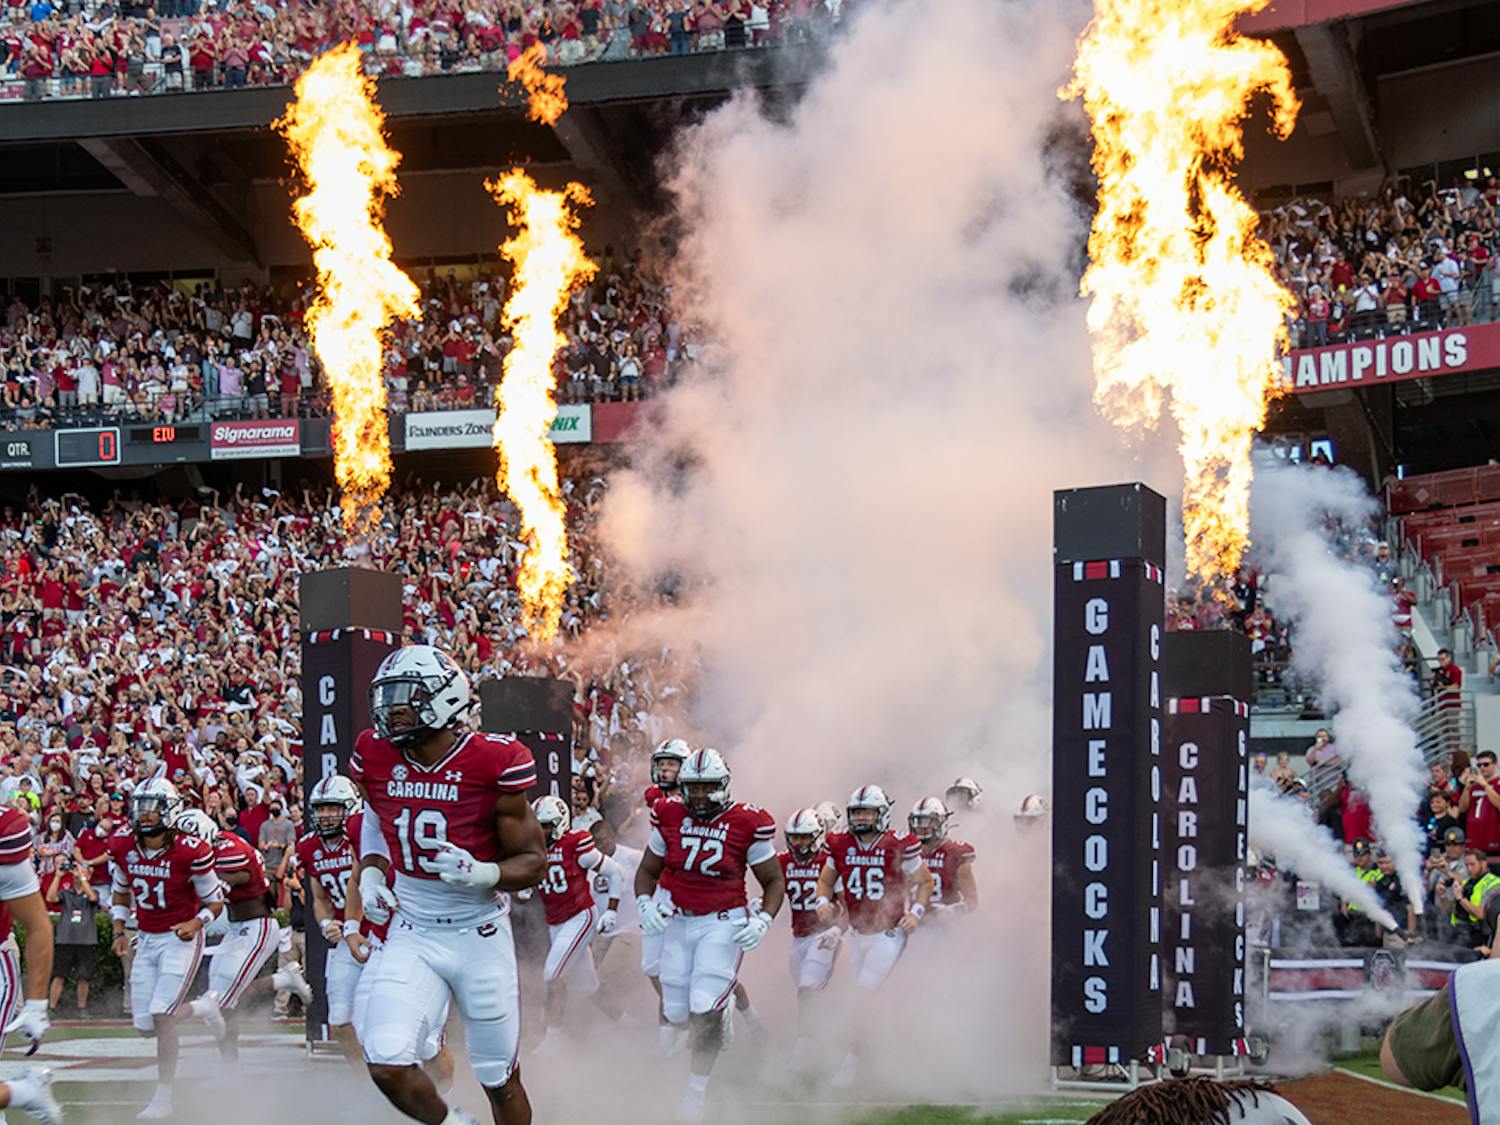 The Gamecocks run out to be greeted by an almost full Williams-Brice Stadium to start off the 2021 football season.